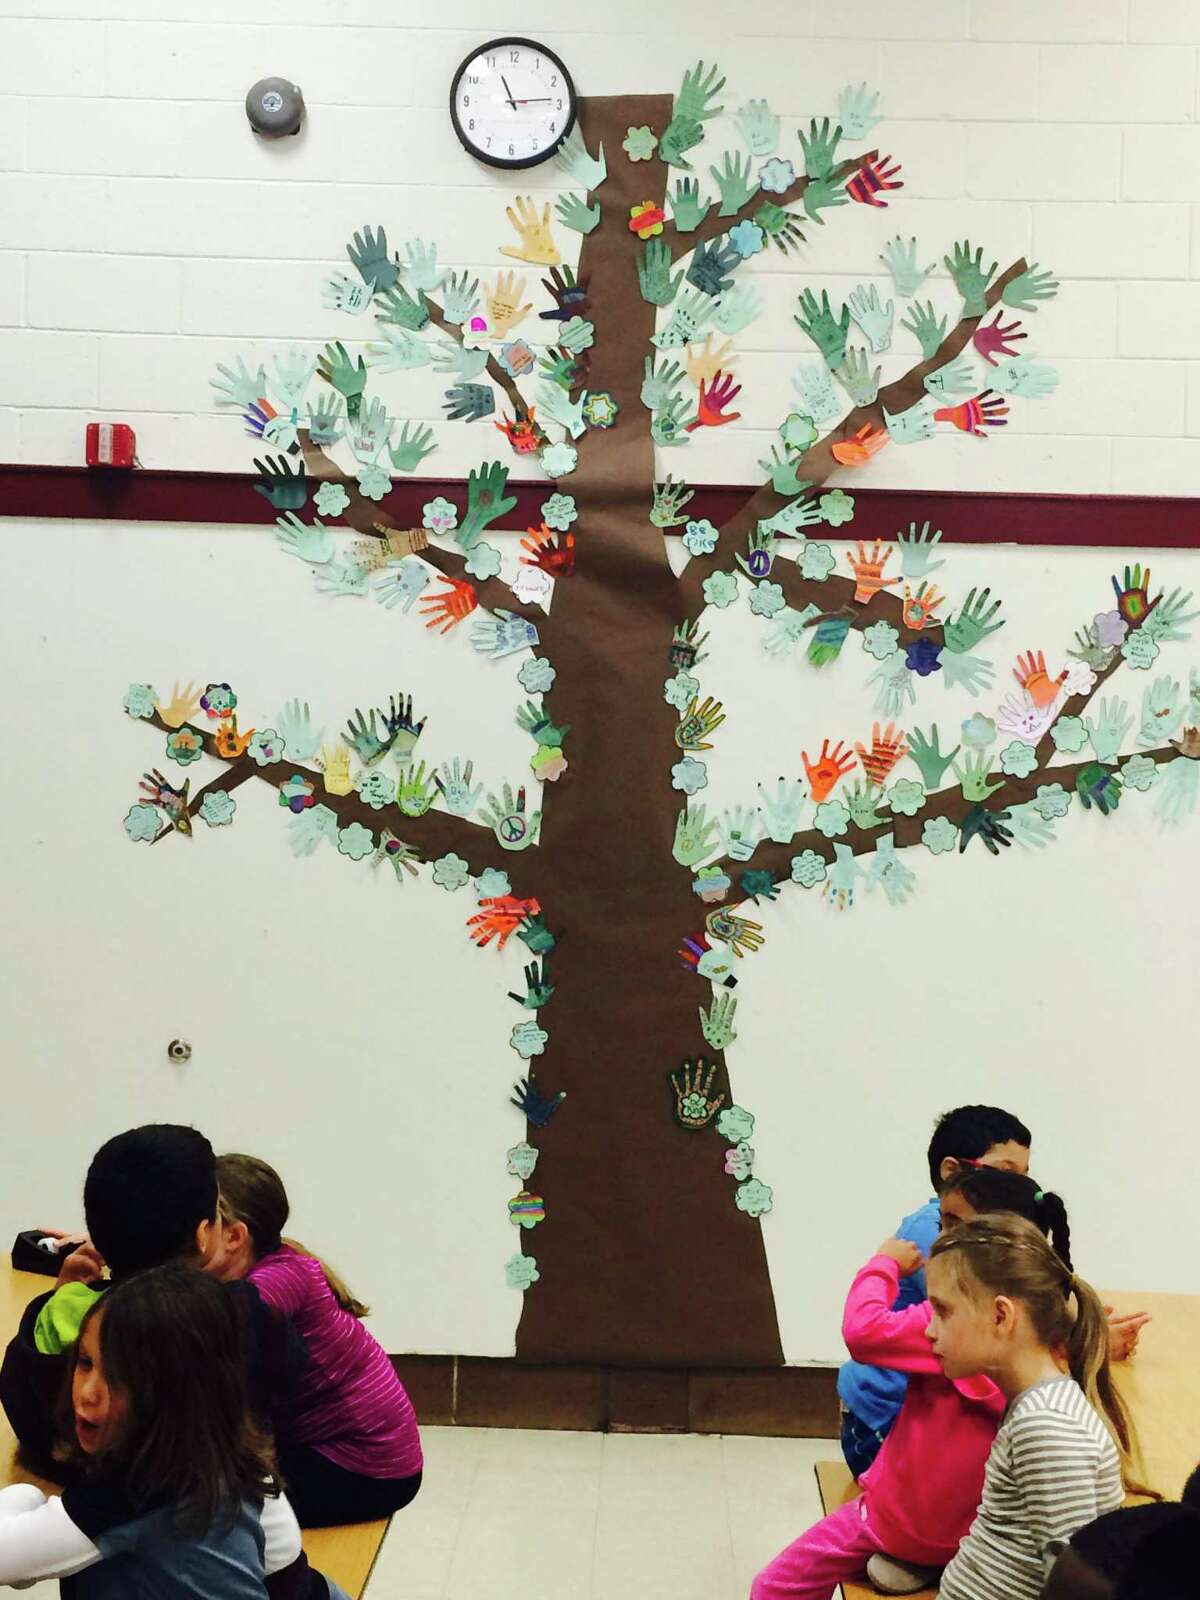 A Ben’s Bells tree in the Great Plain Elementary School in Danbury blooms with leaves of kind hands and the Ben's Bells flower-shaped logo in 2014. Danbury is considering adding classrooms to Great Plain Elementary School to address increasing enrollment.